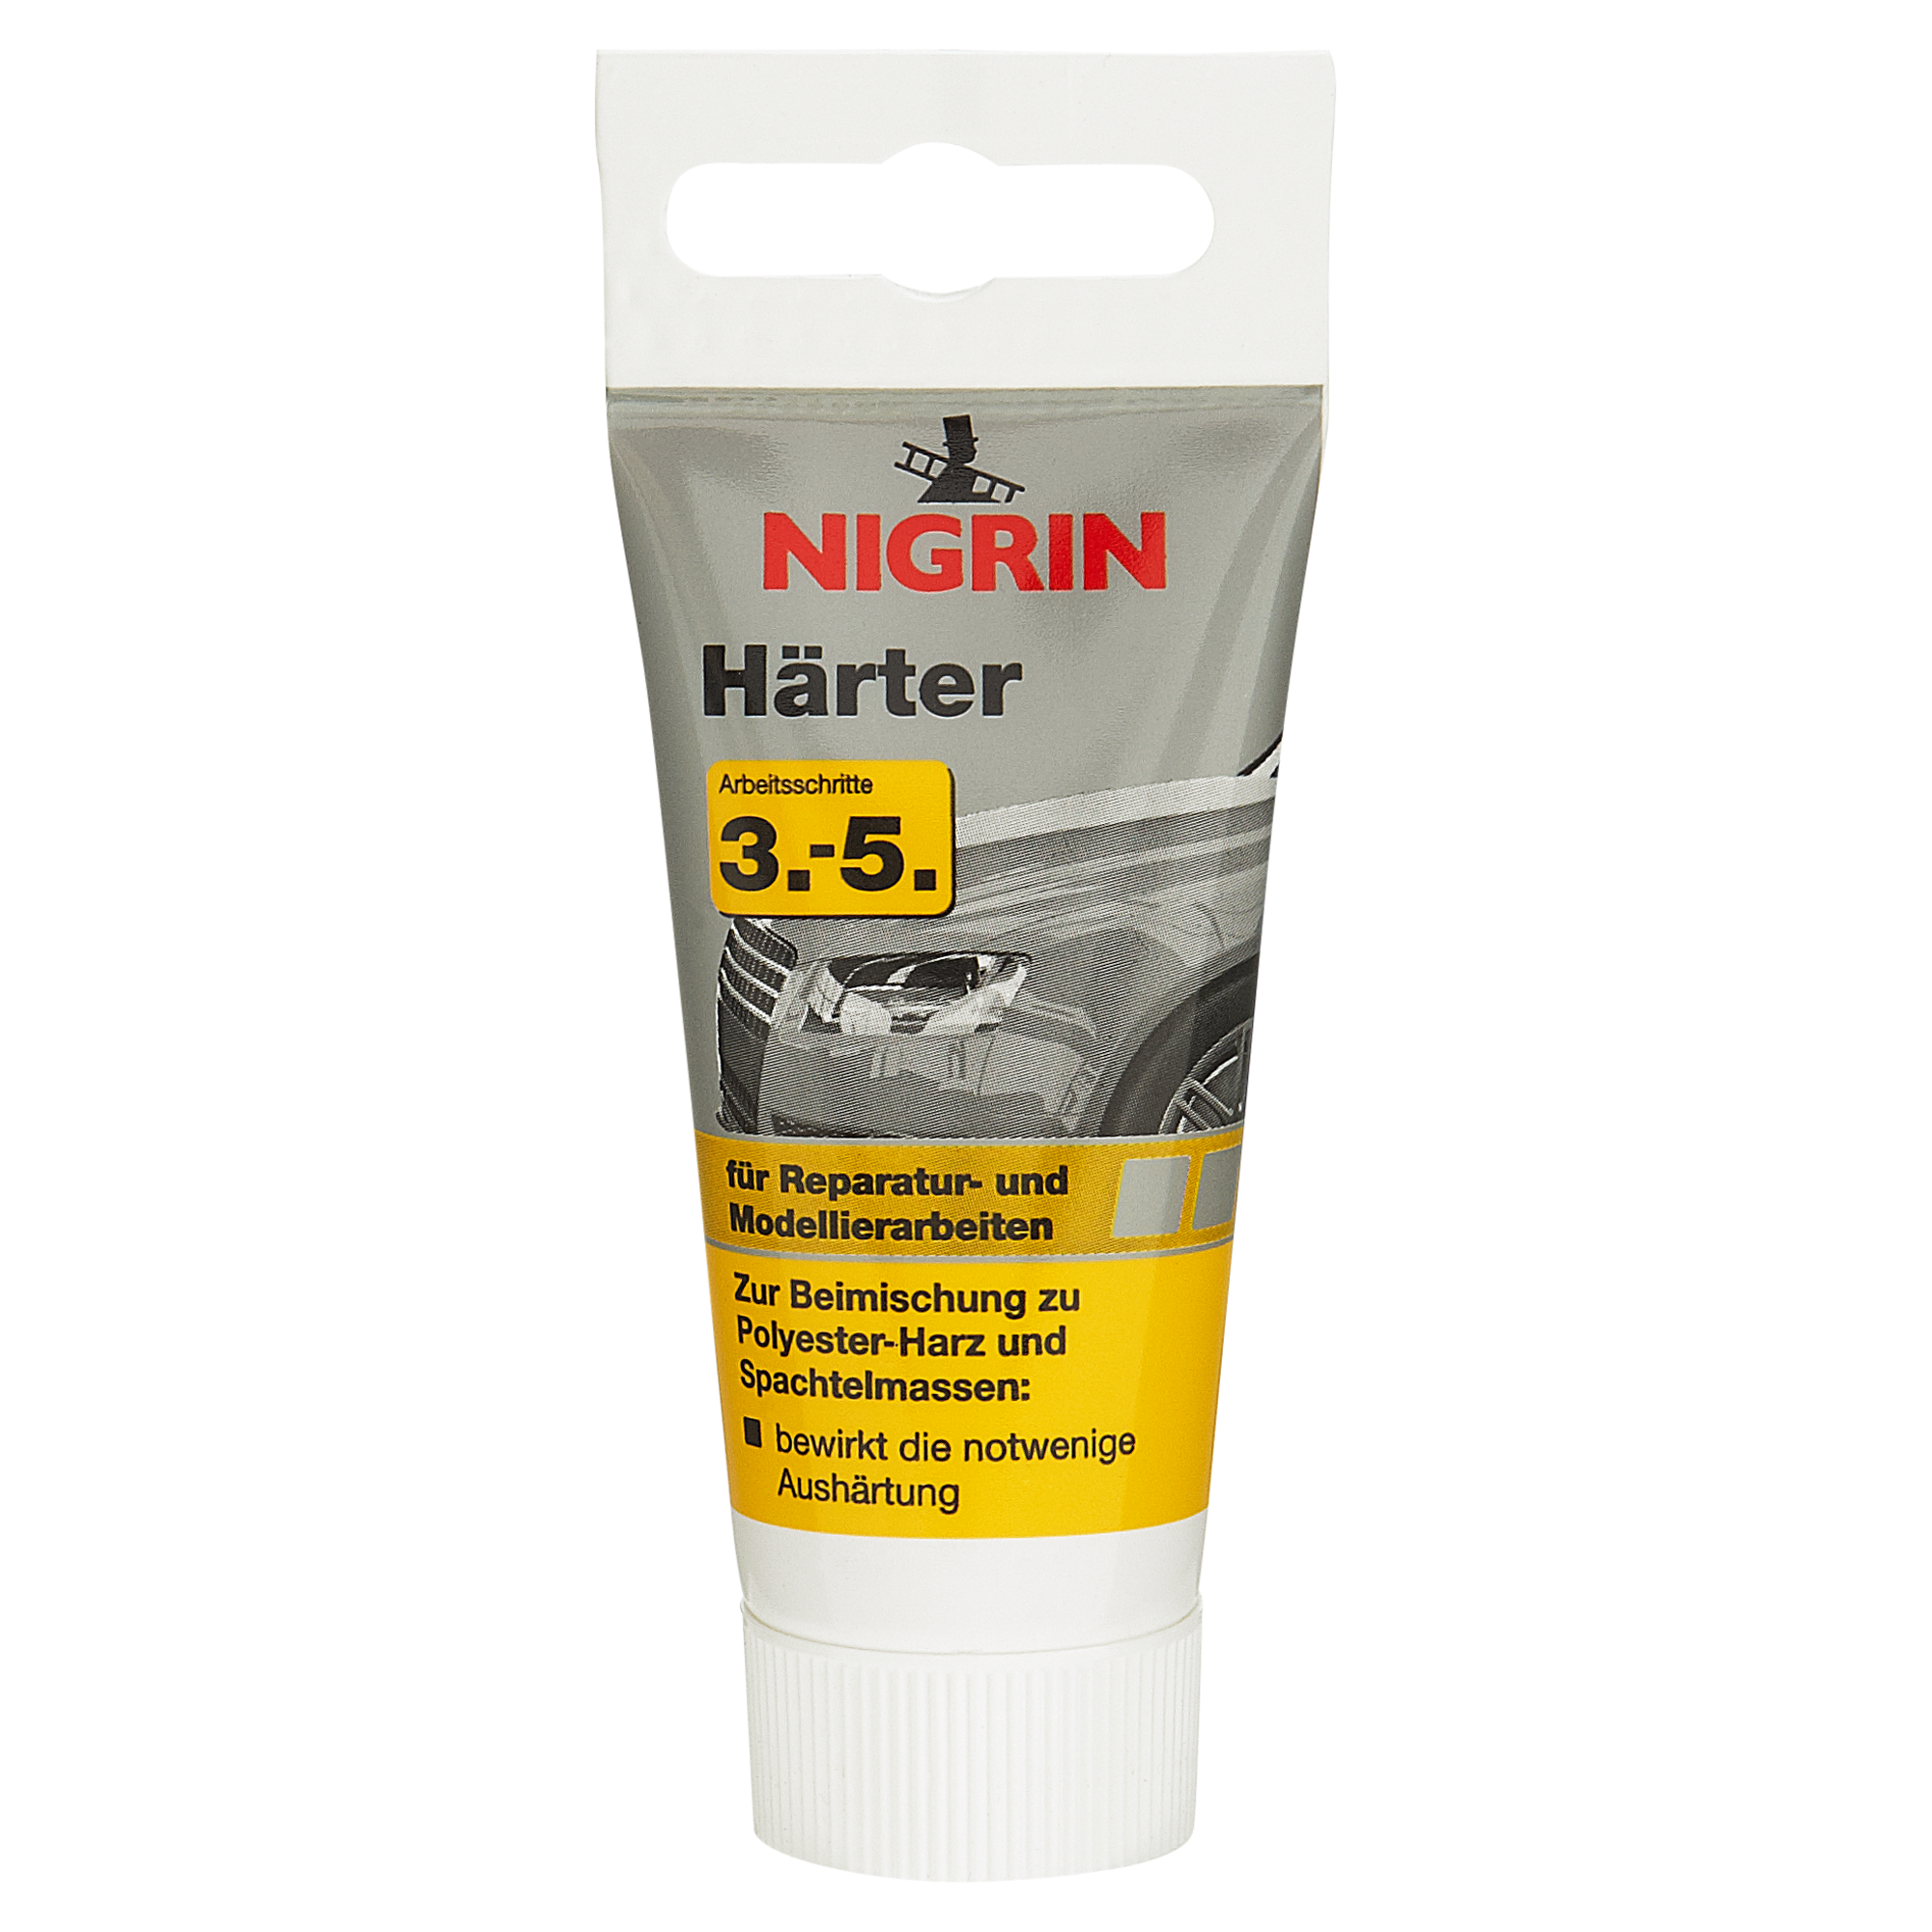 Härter 30 g + product picture